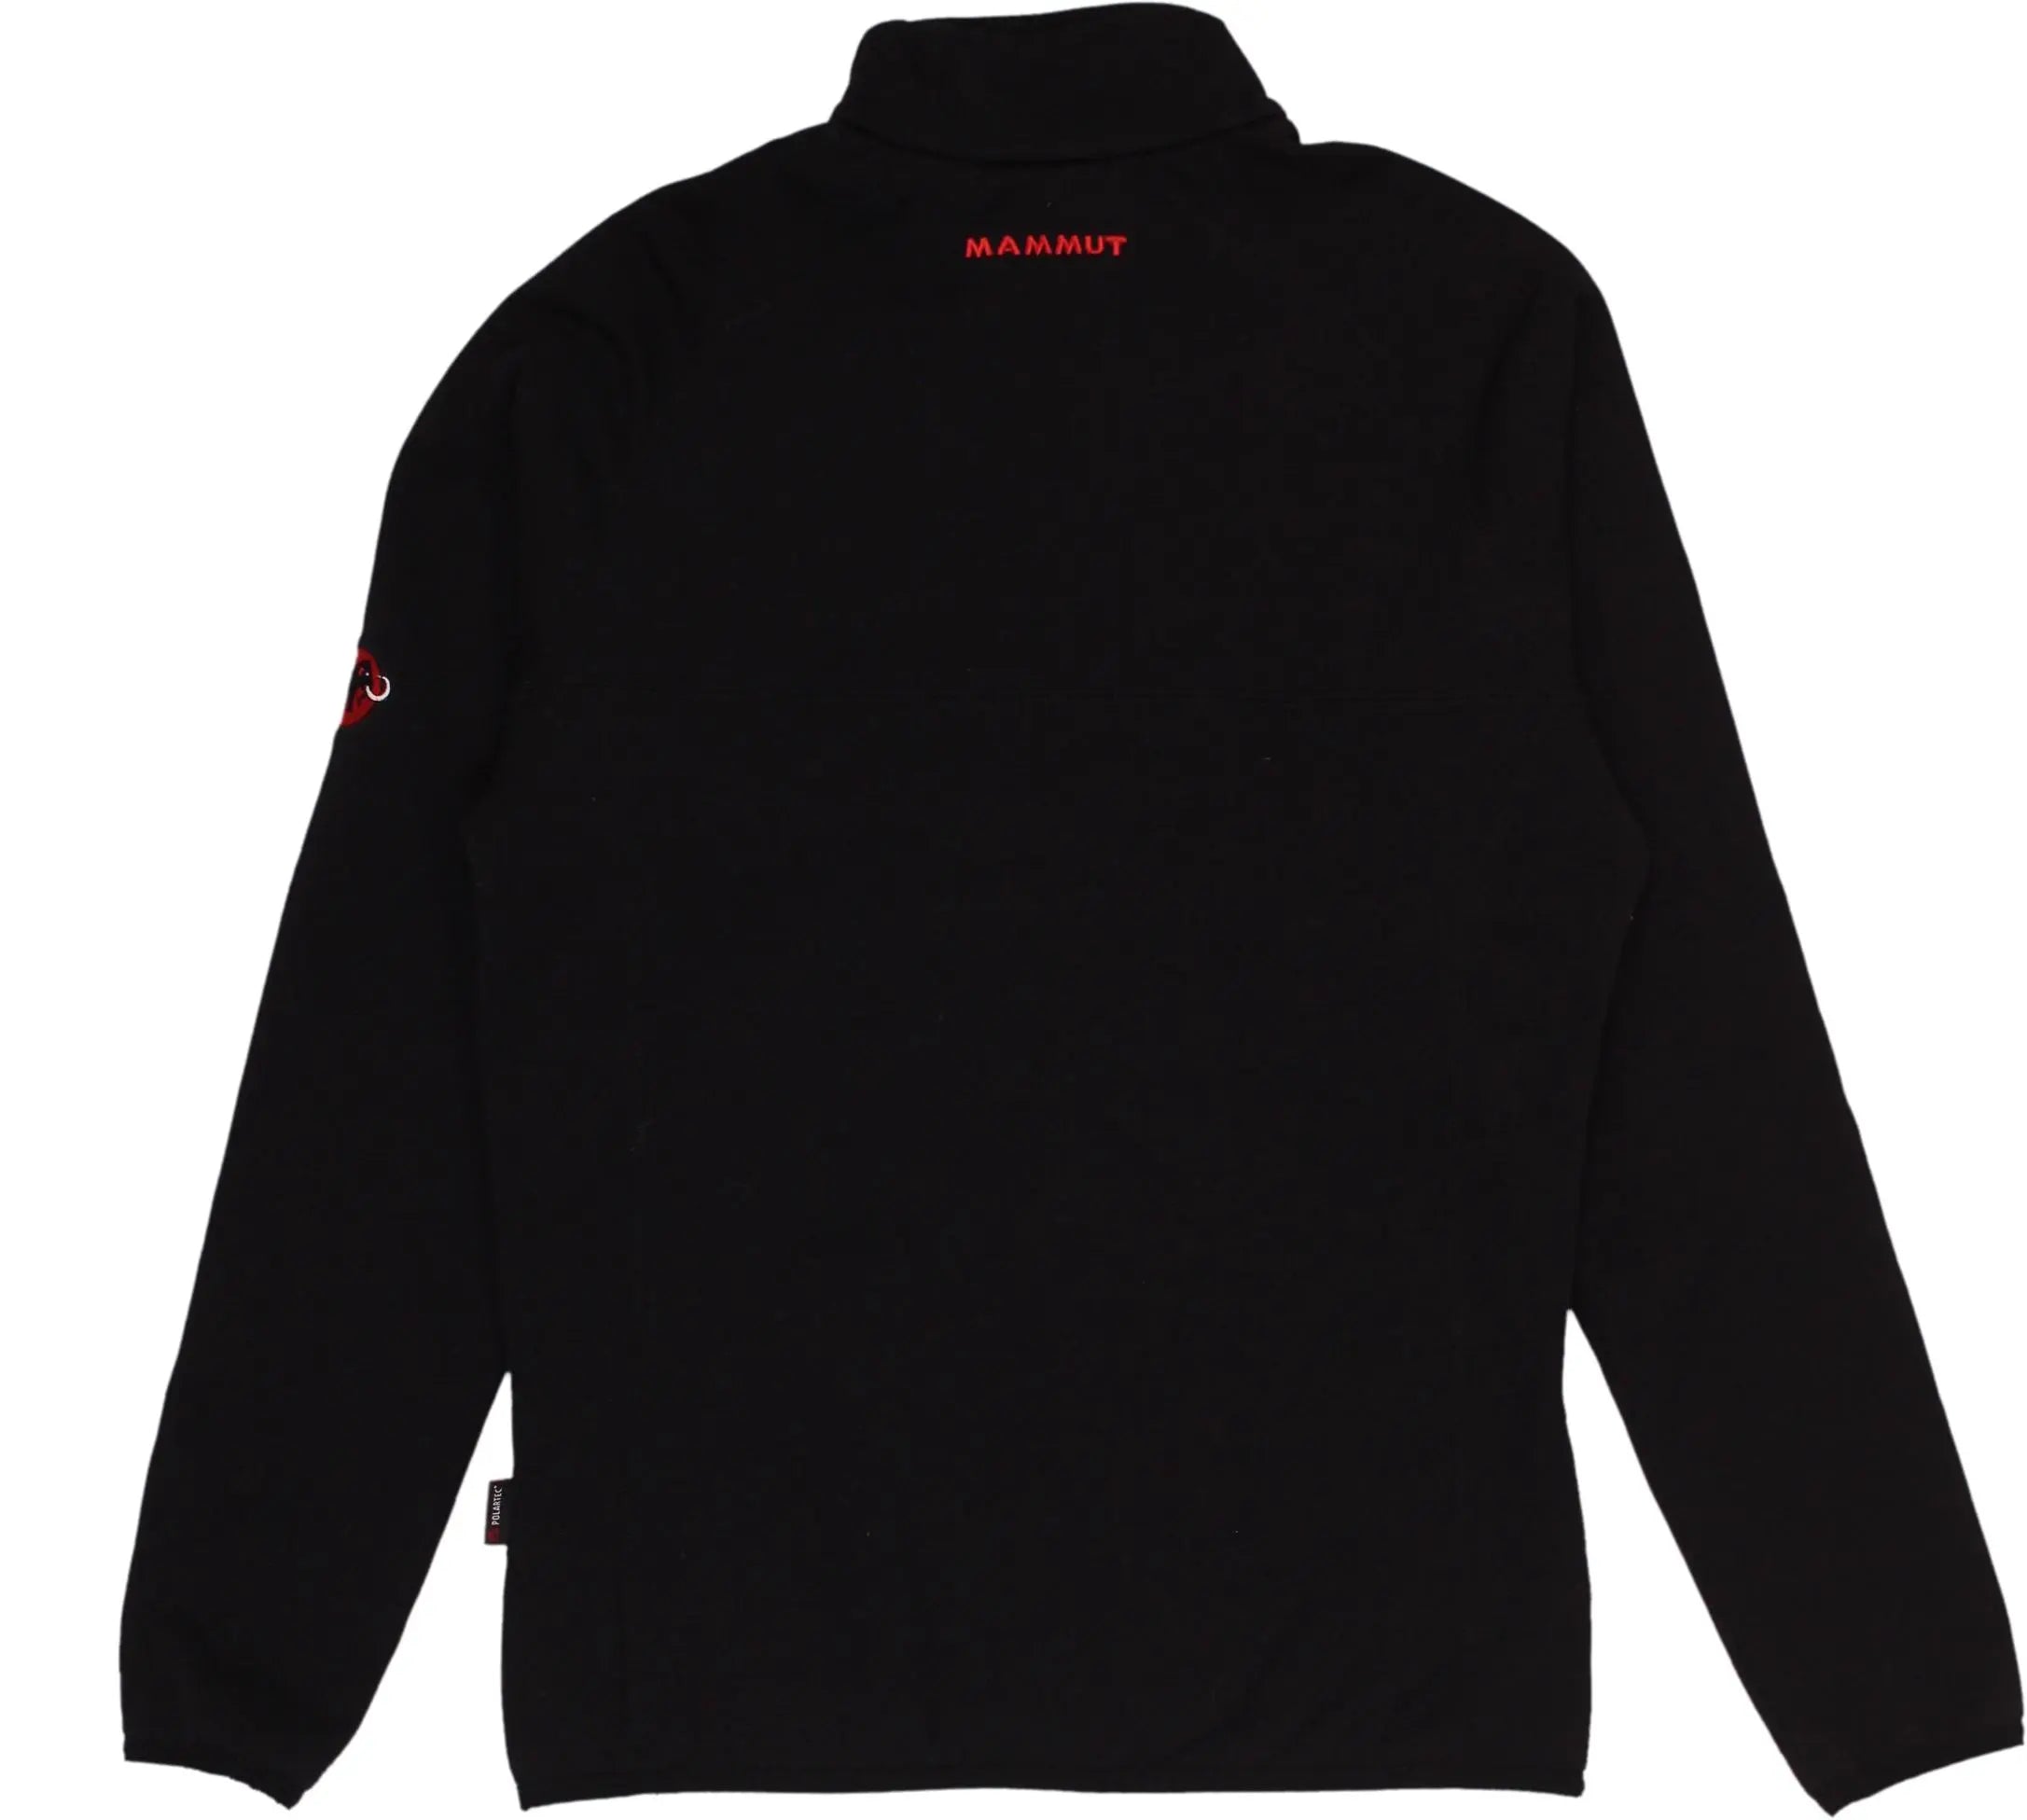 Mammut - Black Long Sleeve Fleece Top by Mammut- ThriftTale.com - Vintage and second handclothing